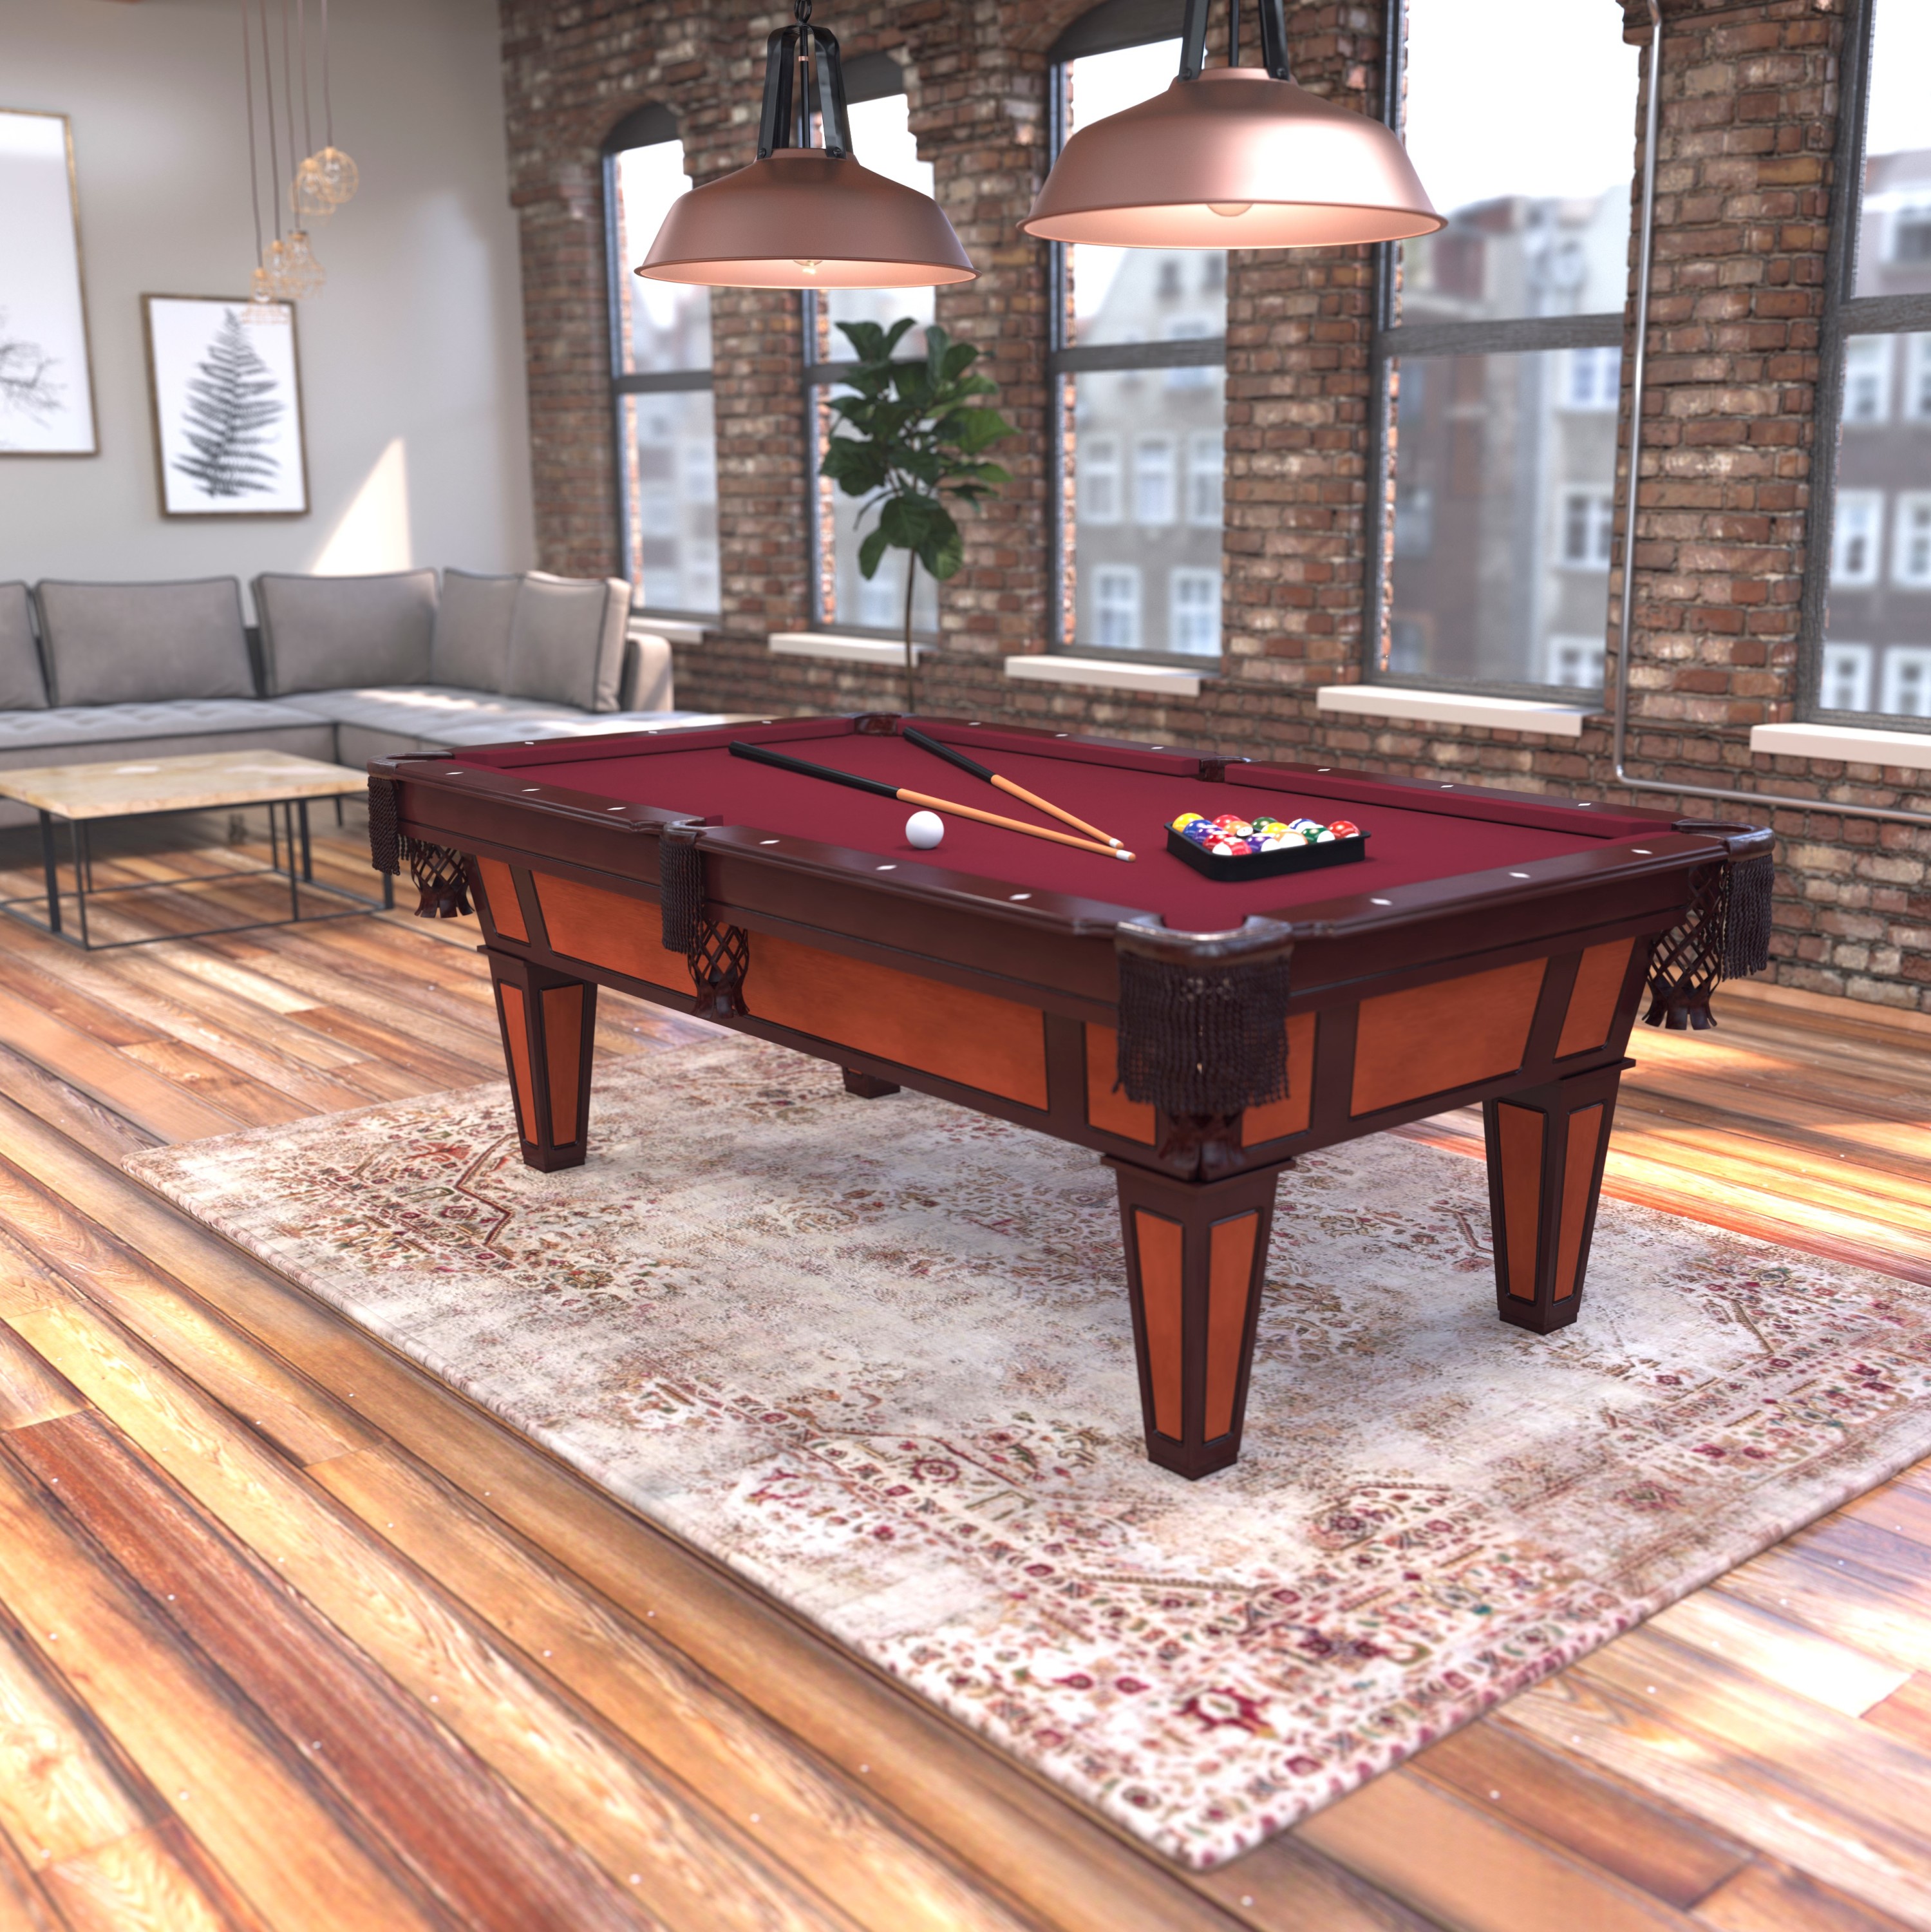 Fat Cat Reno 7.5' Pool Table with Pool Cues and Accessories - image 12 of 13